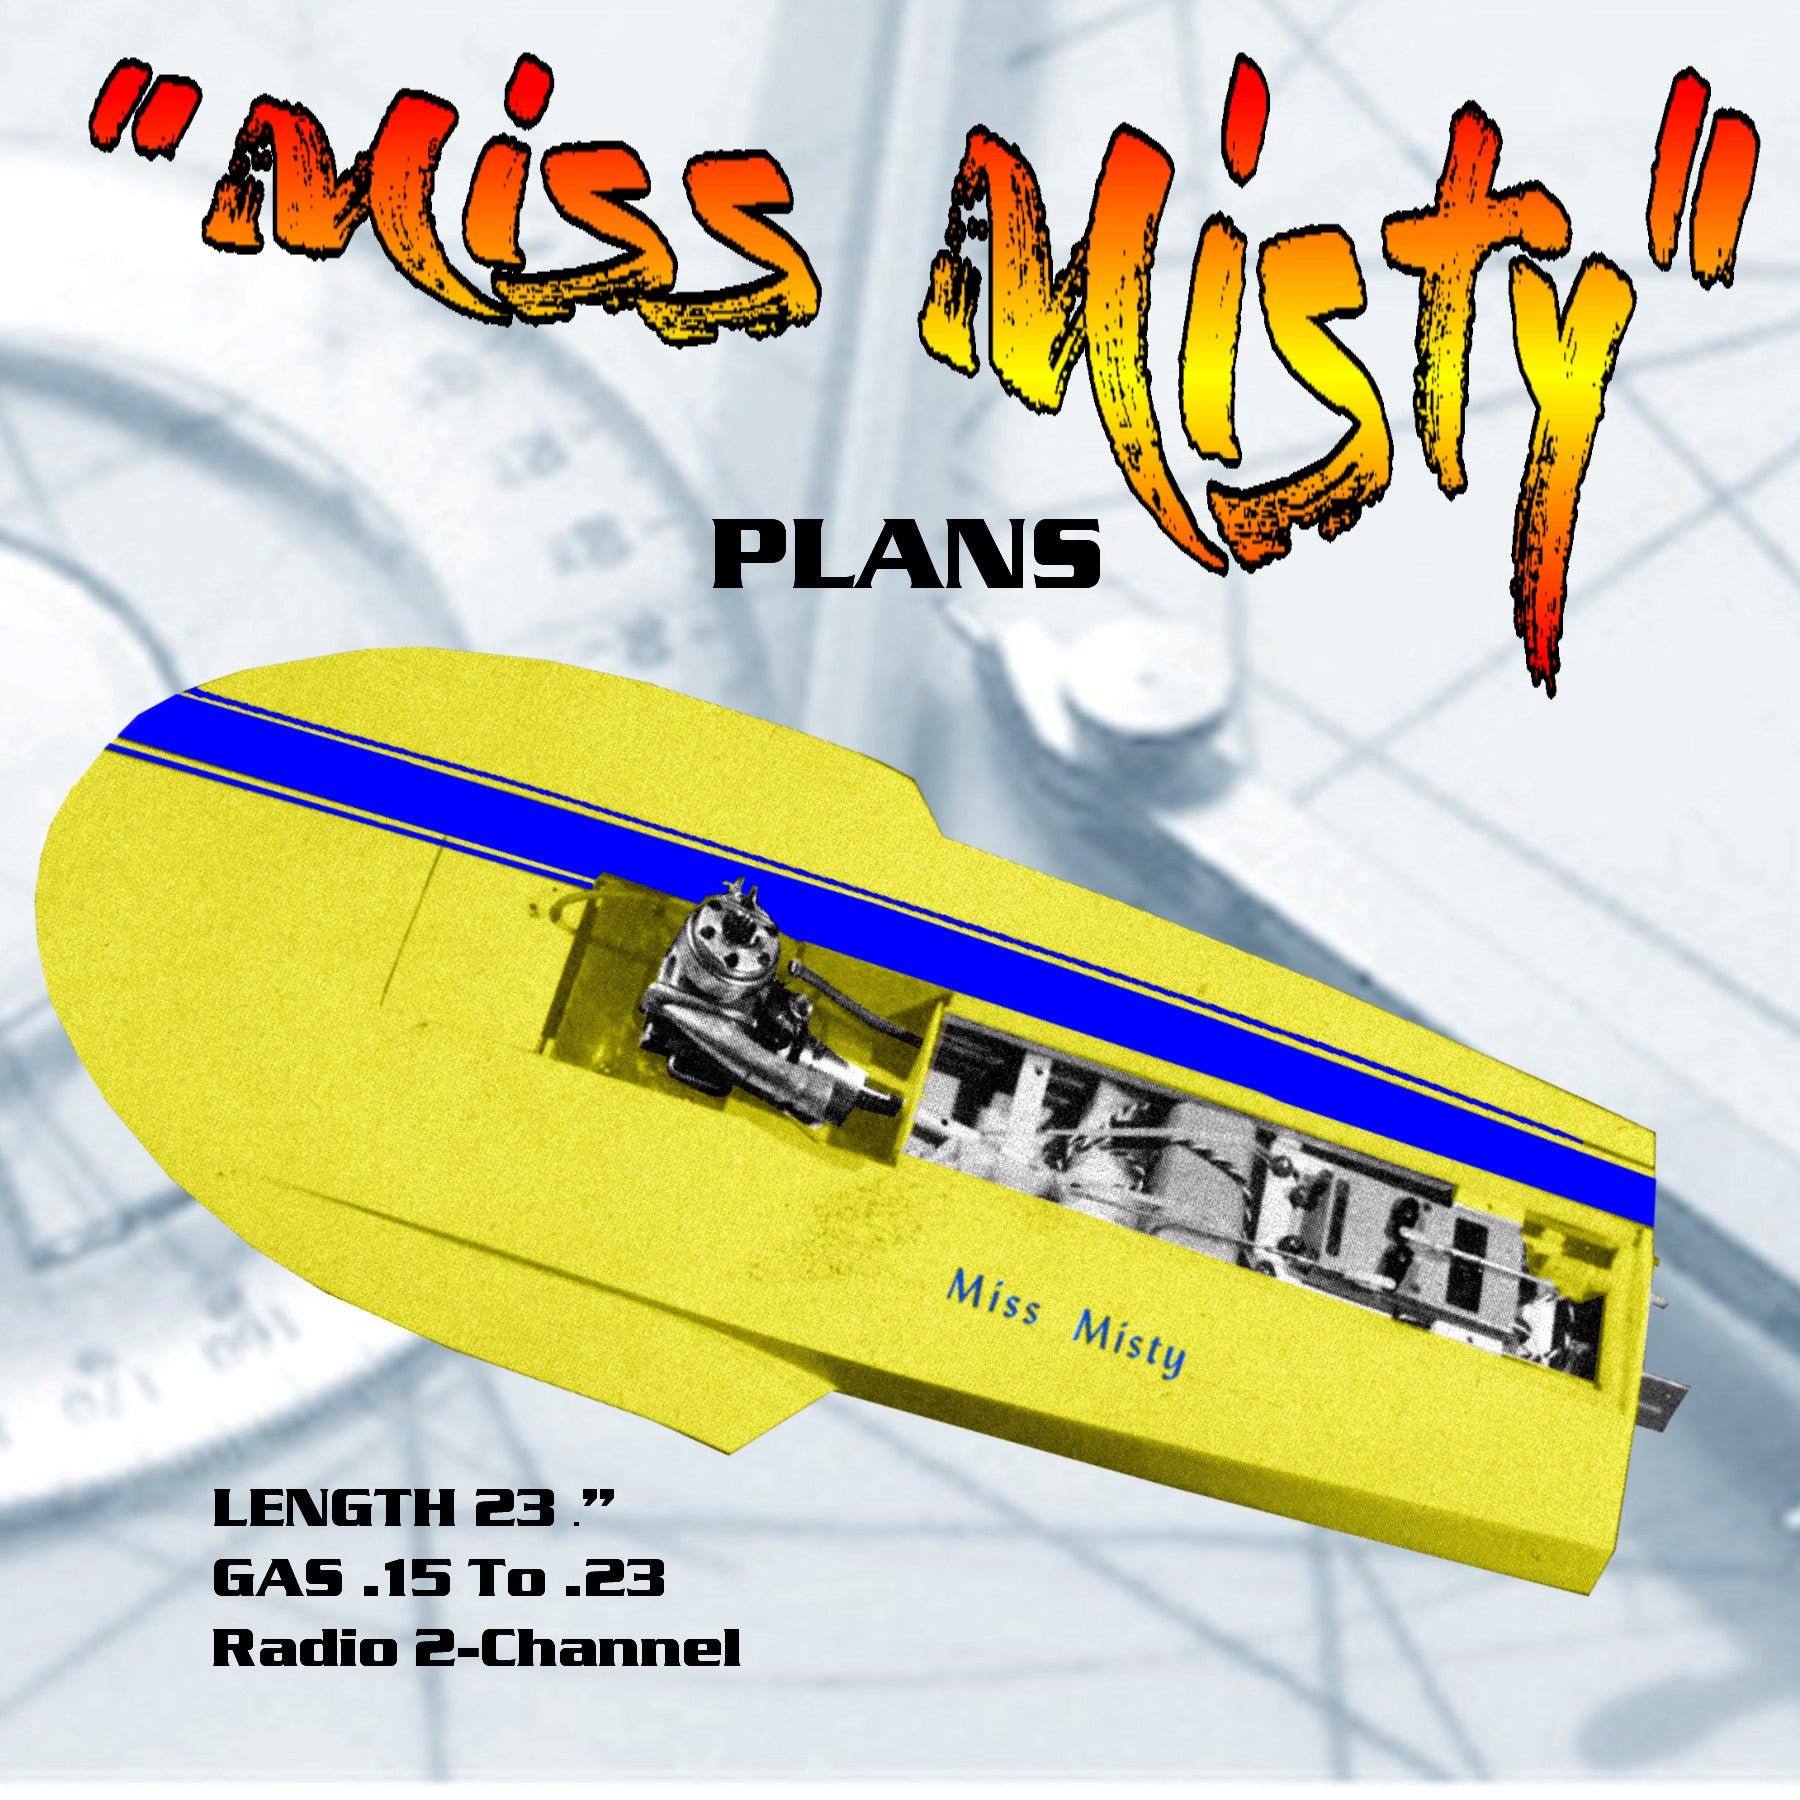 full size printed plans hydro for closed course racing "miss misty" for 2-channel